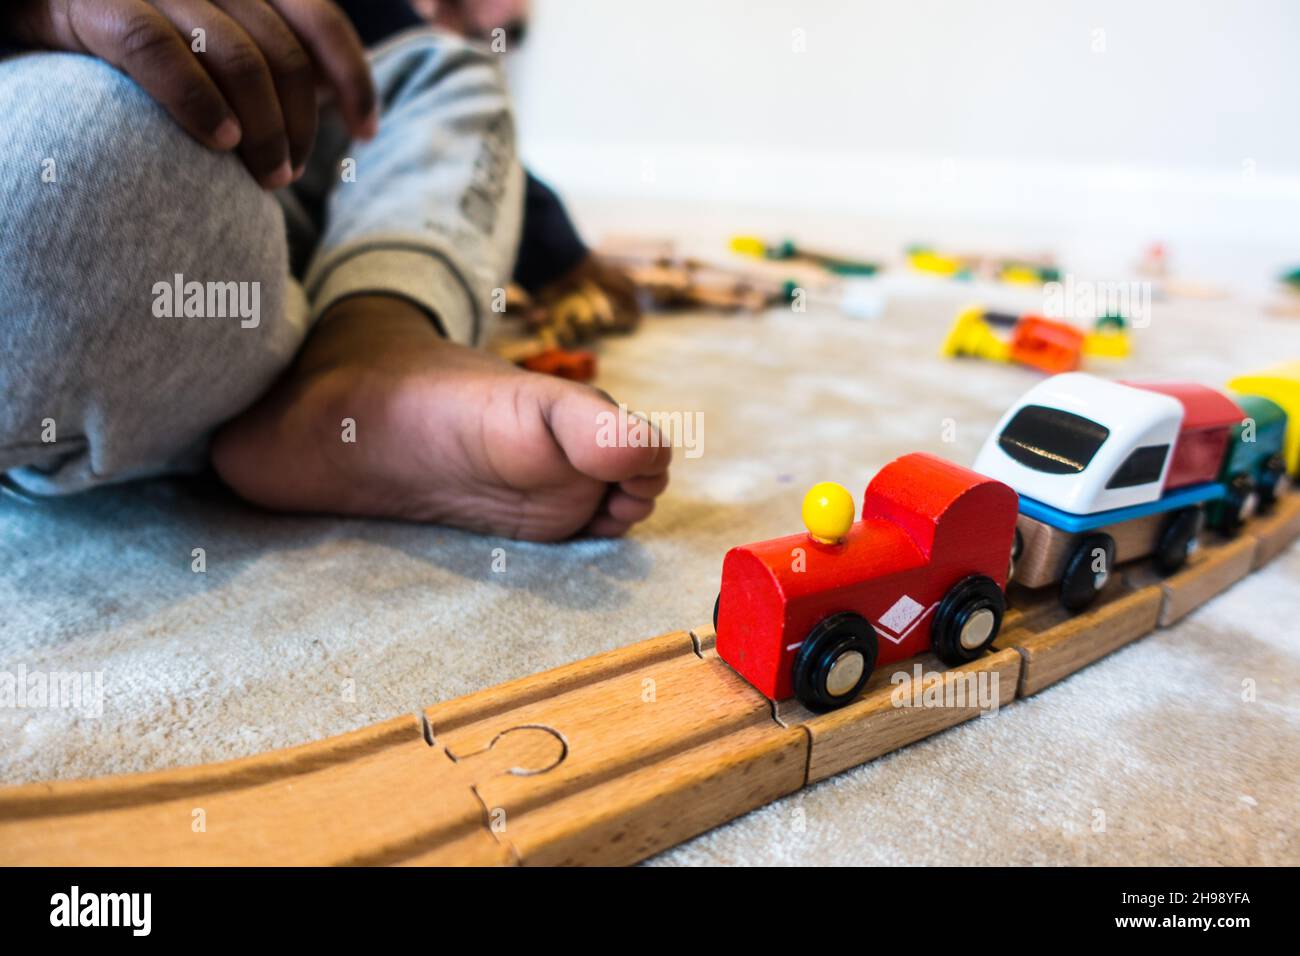 Boy playing with train toy. Indian boy aged 3 playing with a wooden train track and trains set Stock Photo